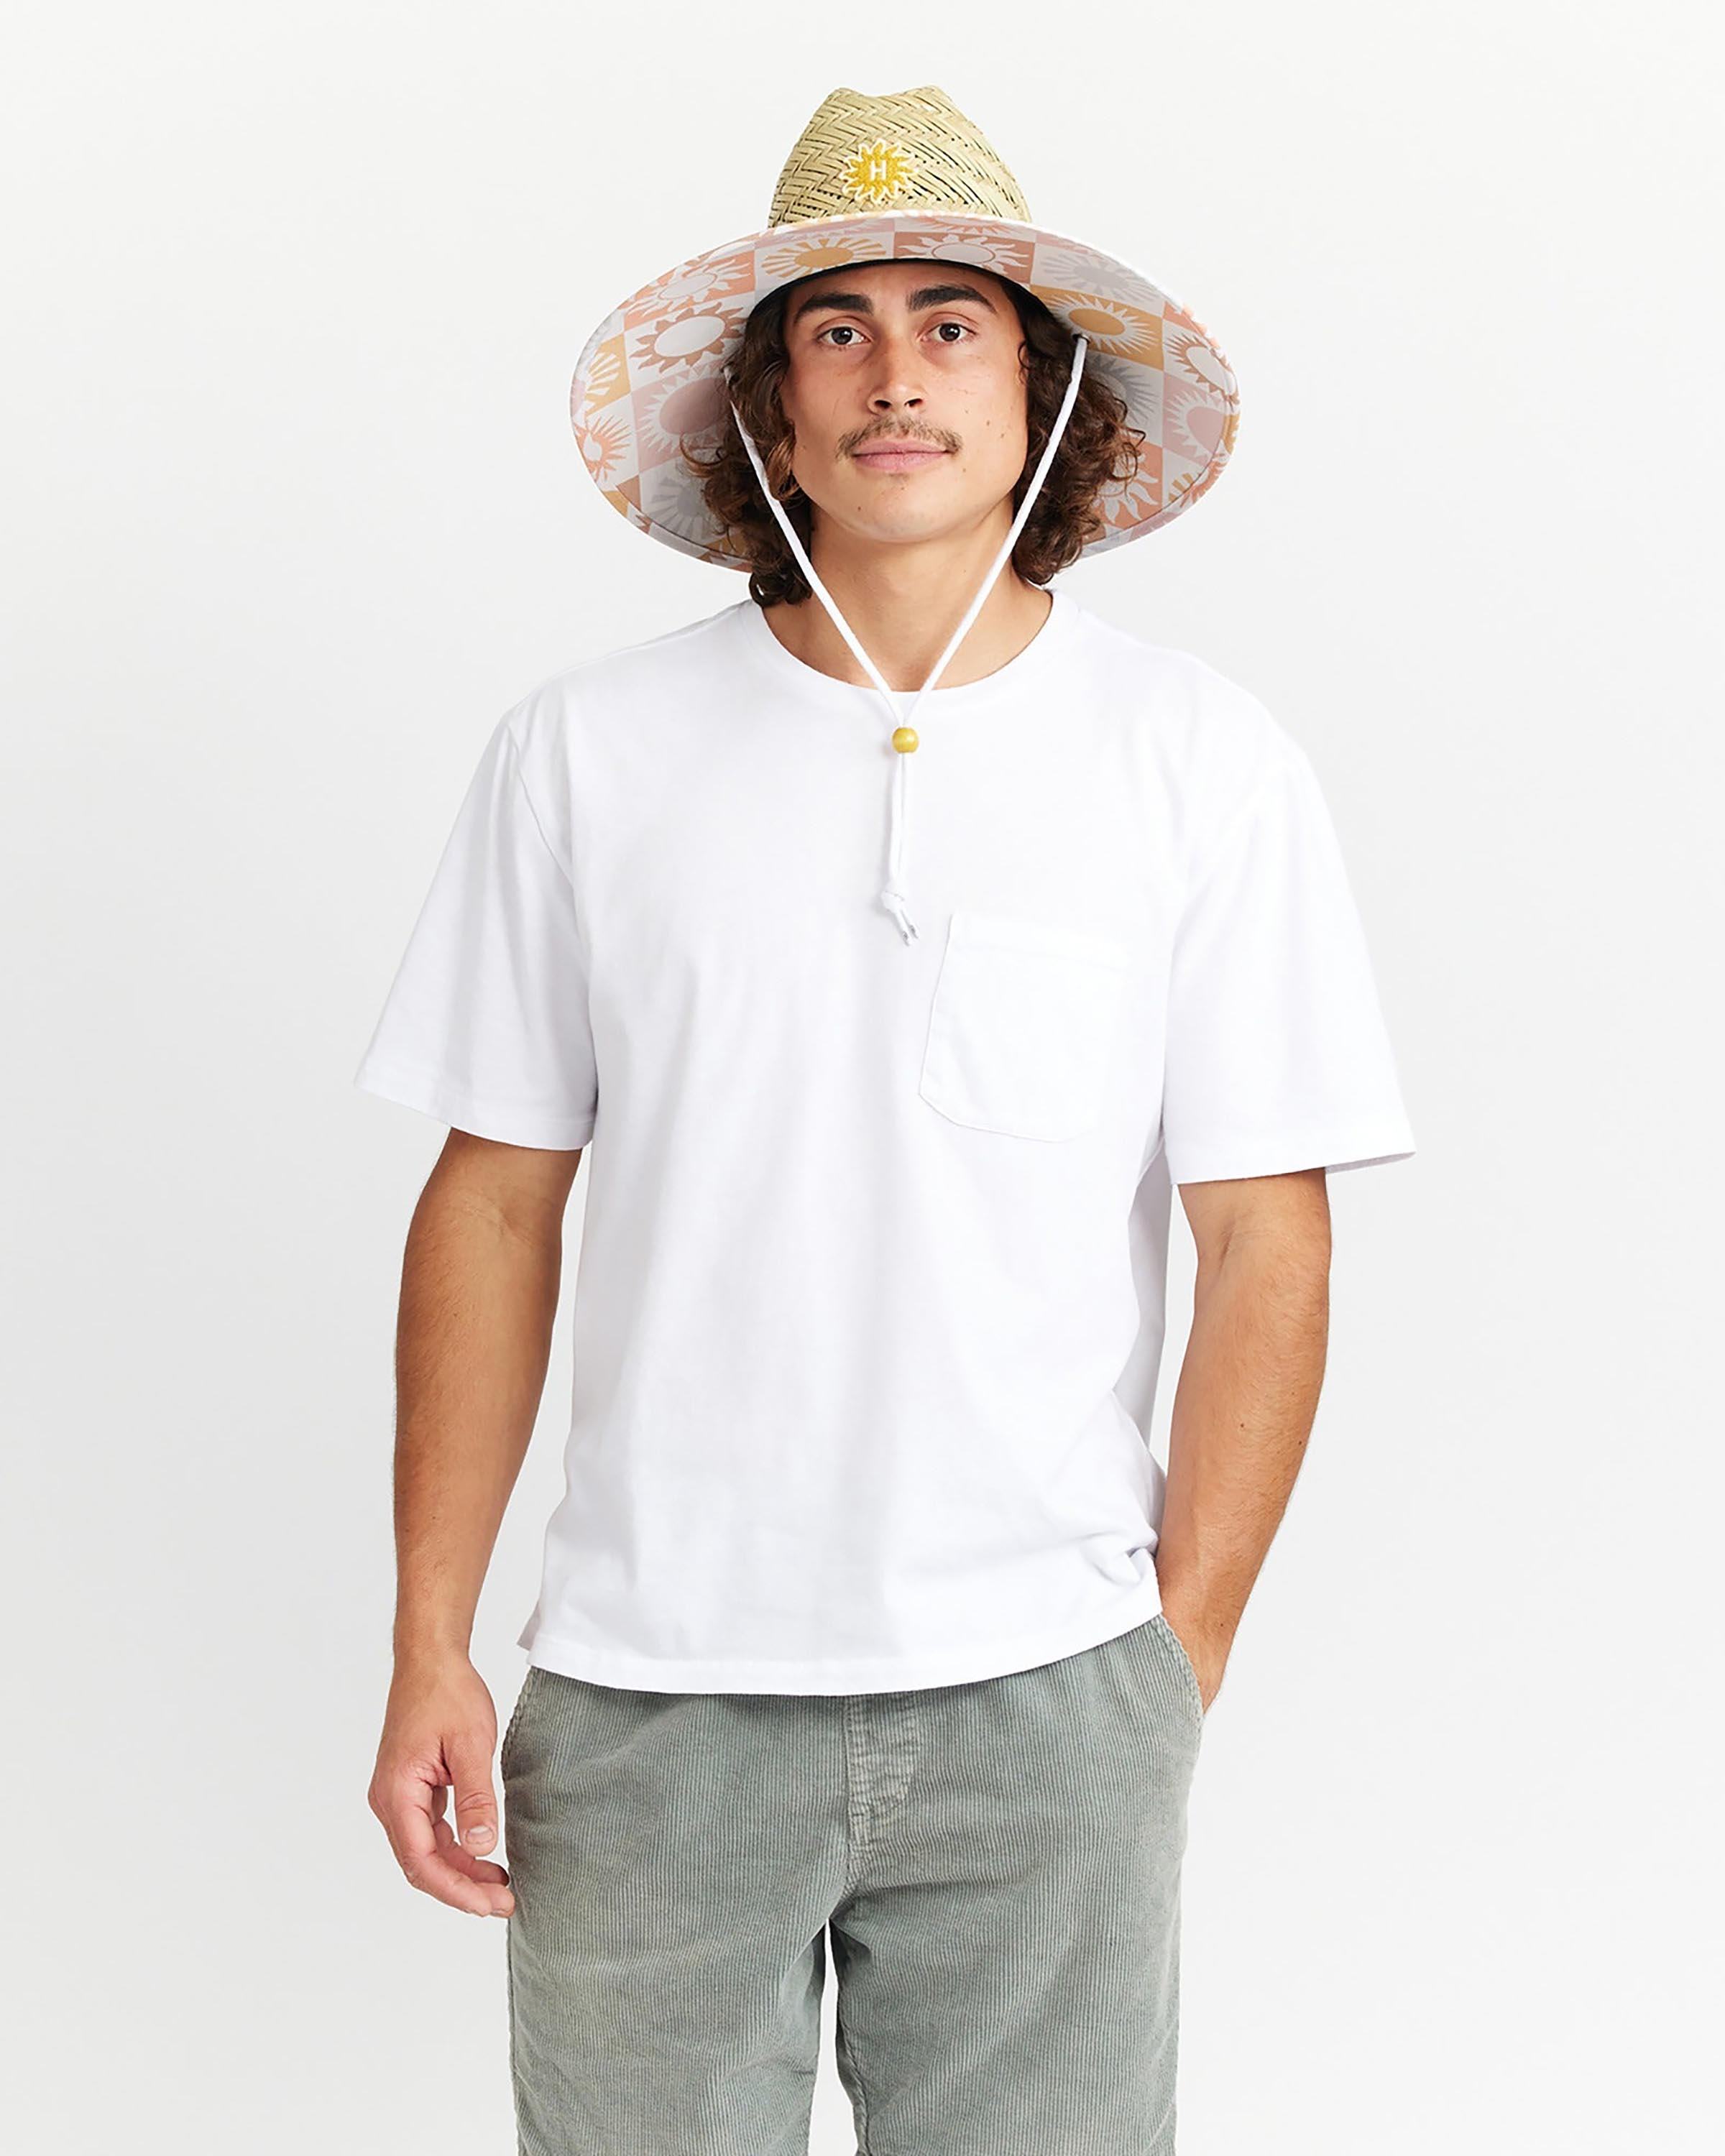 Ray - undefined - Hemlock Hat Co. Lifeguards - Adults